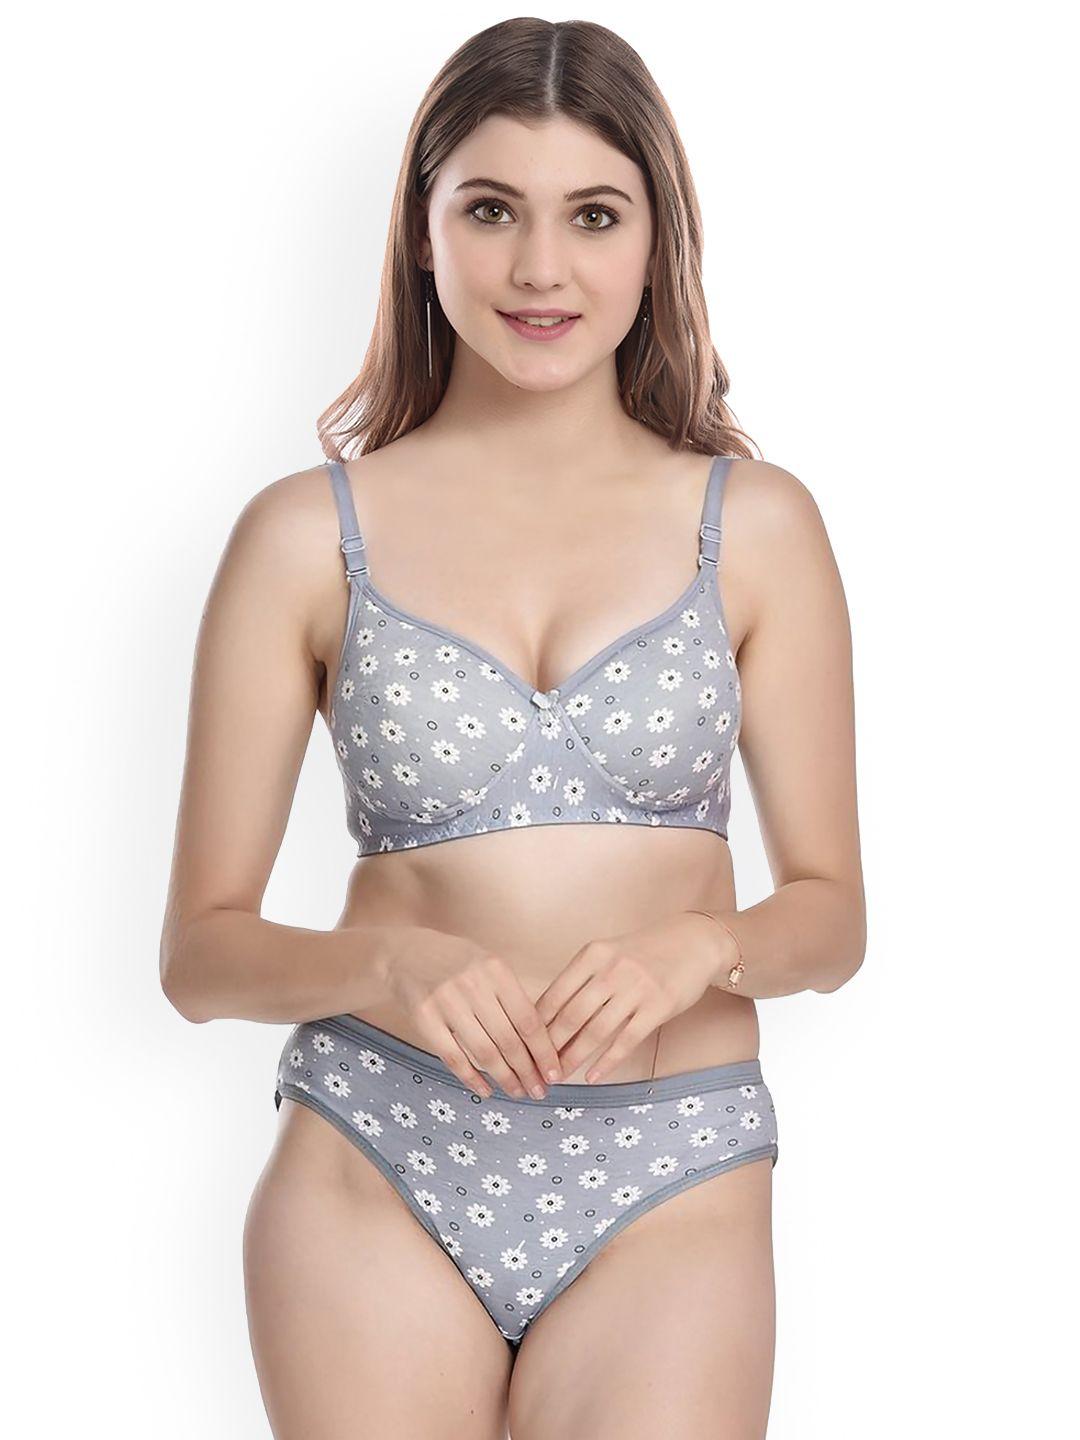 arousy floral printed cotton lingerie set